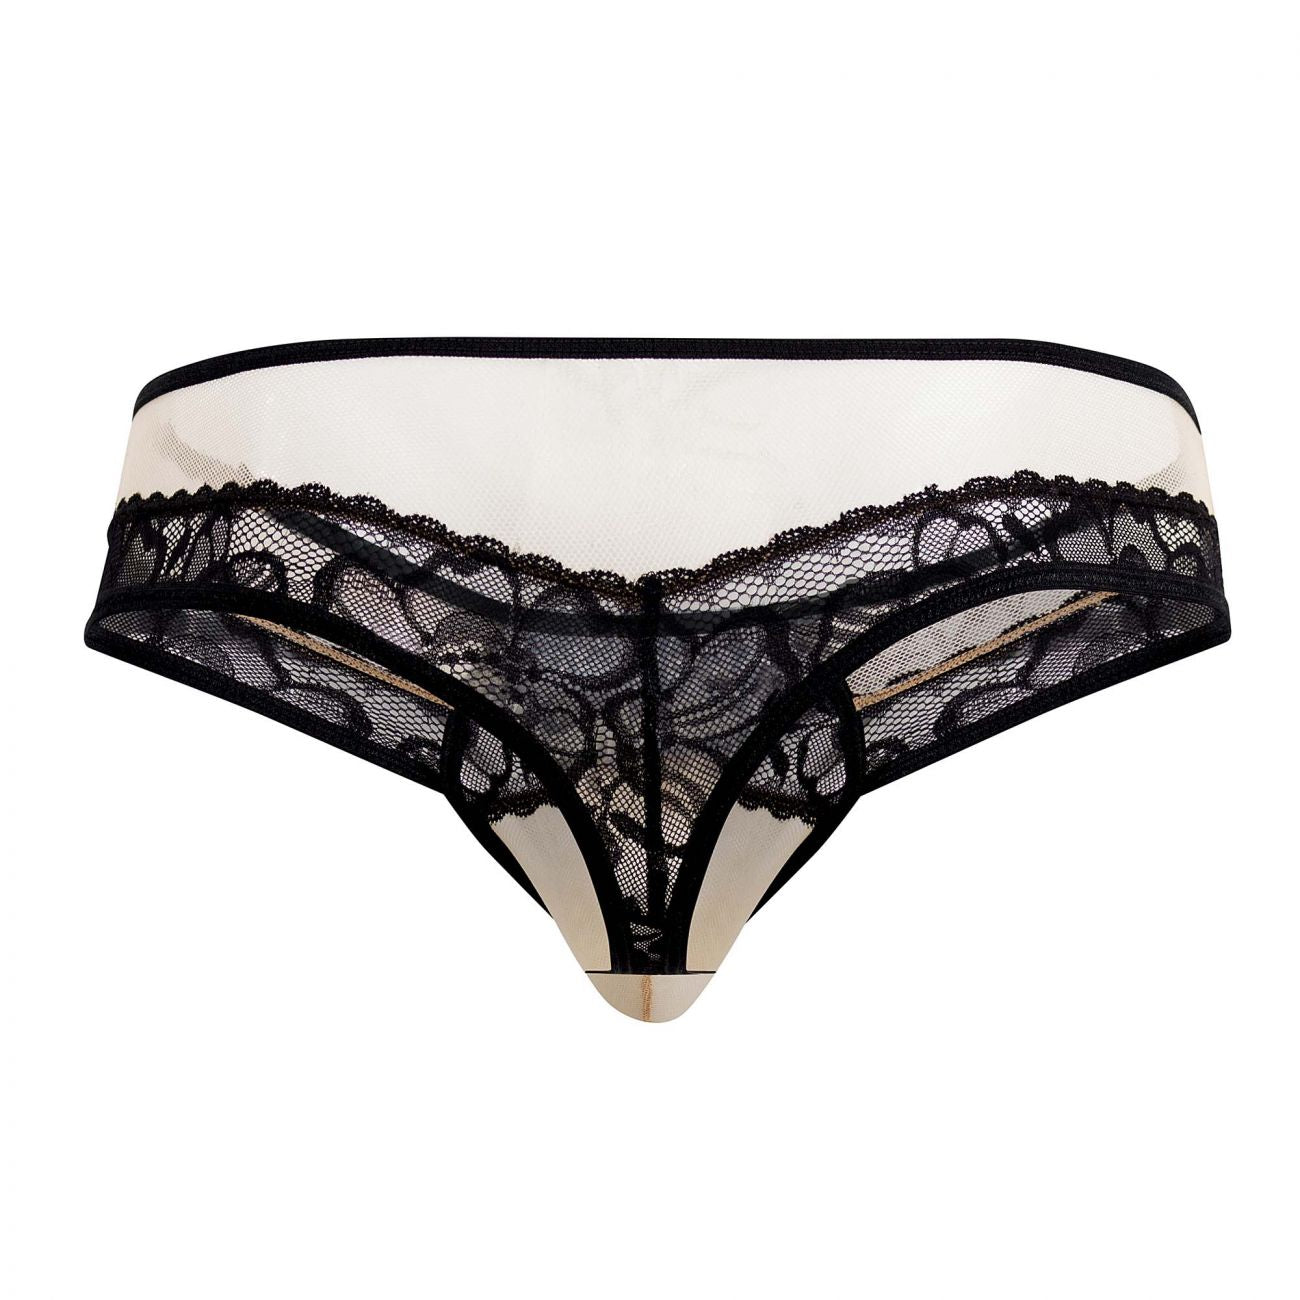 CandyMan 99516 Mesh-Lace Thongs Beige and Black